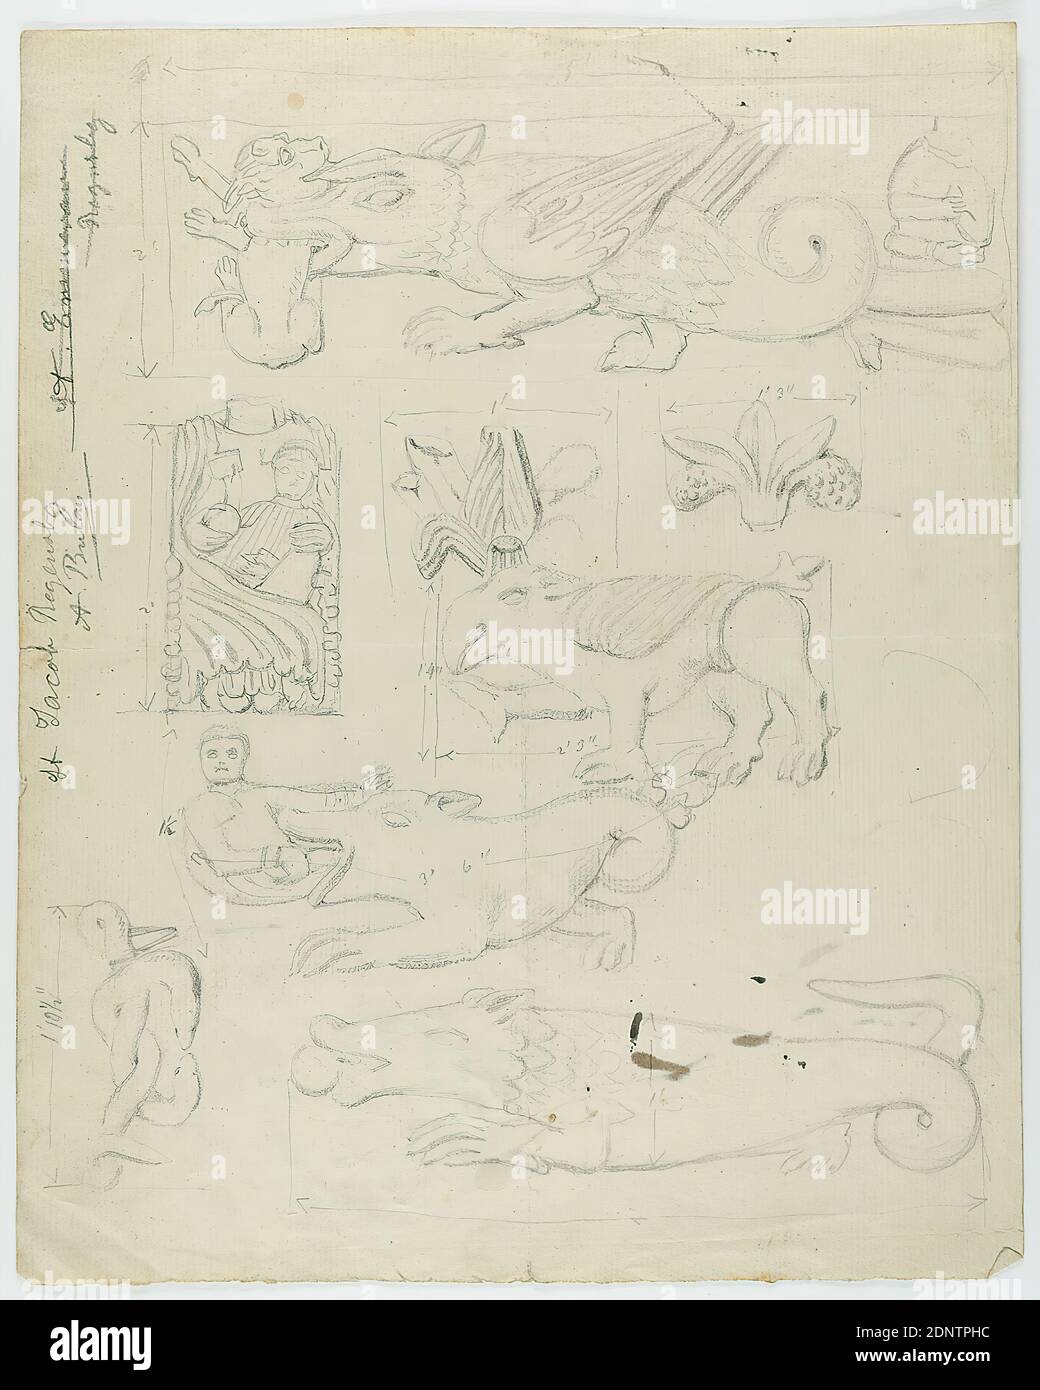 Theodor Bülau, St. Jacob, Regensburg. Figure decoration of the northern portal wall, paper, pencil, drawing, sheet size: height: 26.7 cm; width: 21.3 cm, inscribed: recto li.: in lead: St. Jacob Regensburg, drawing, graphics, facade decorations (architecture), mythical creatures, architectural details, portal (church building Stock Photo